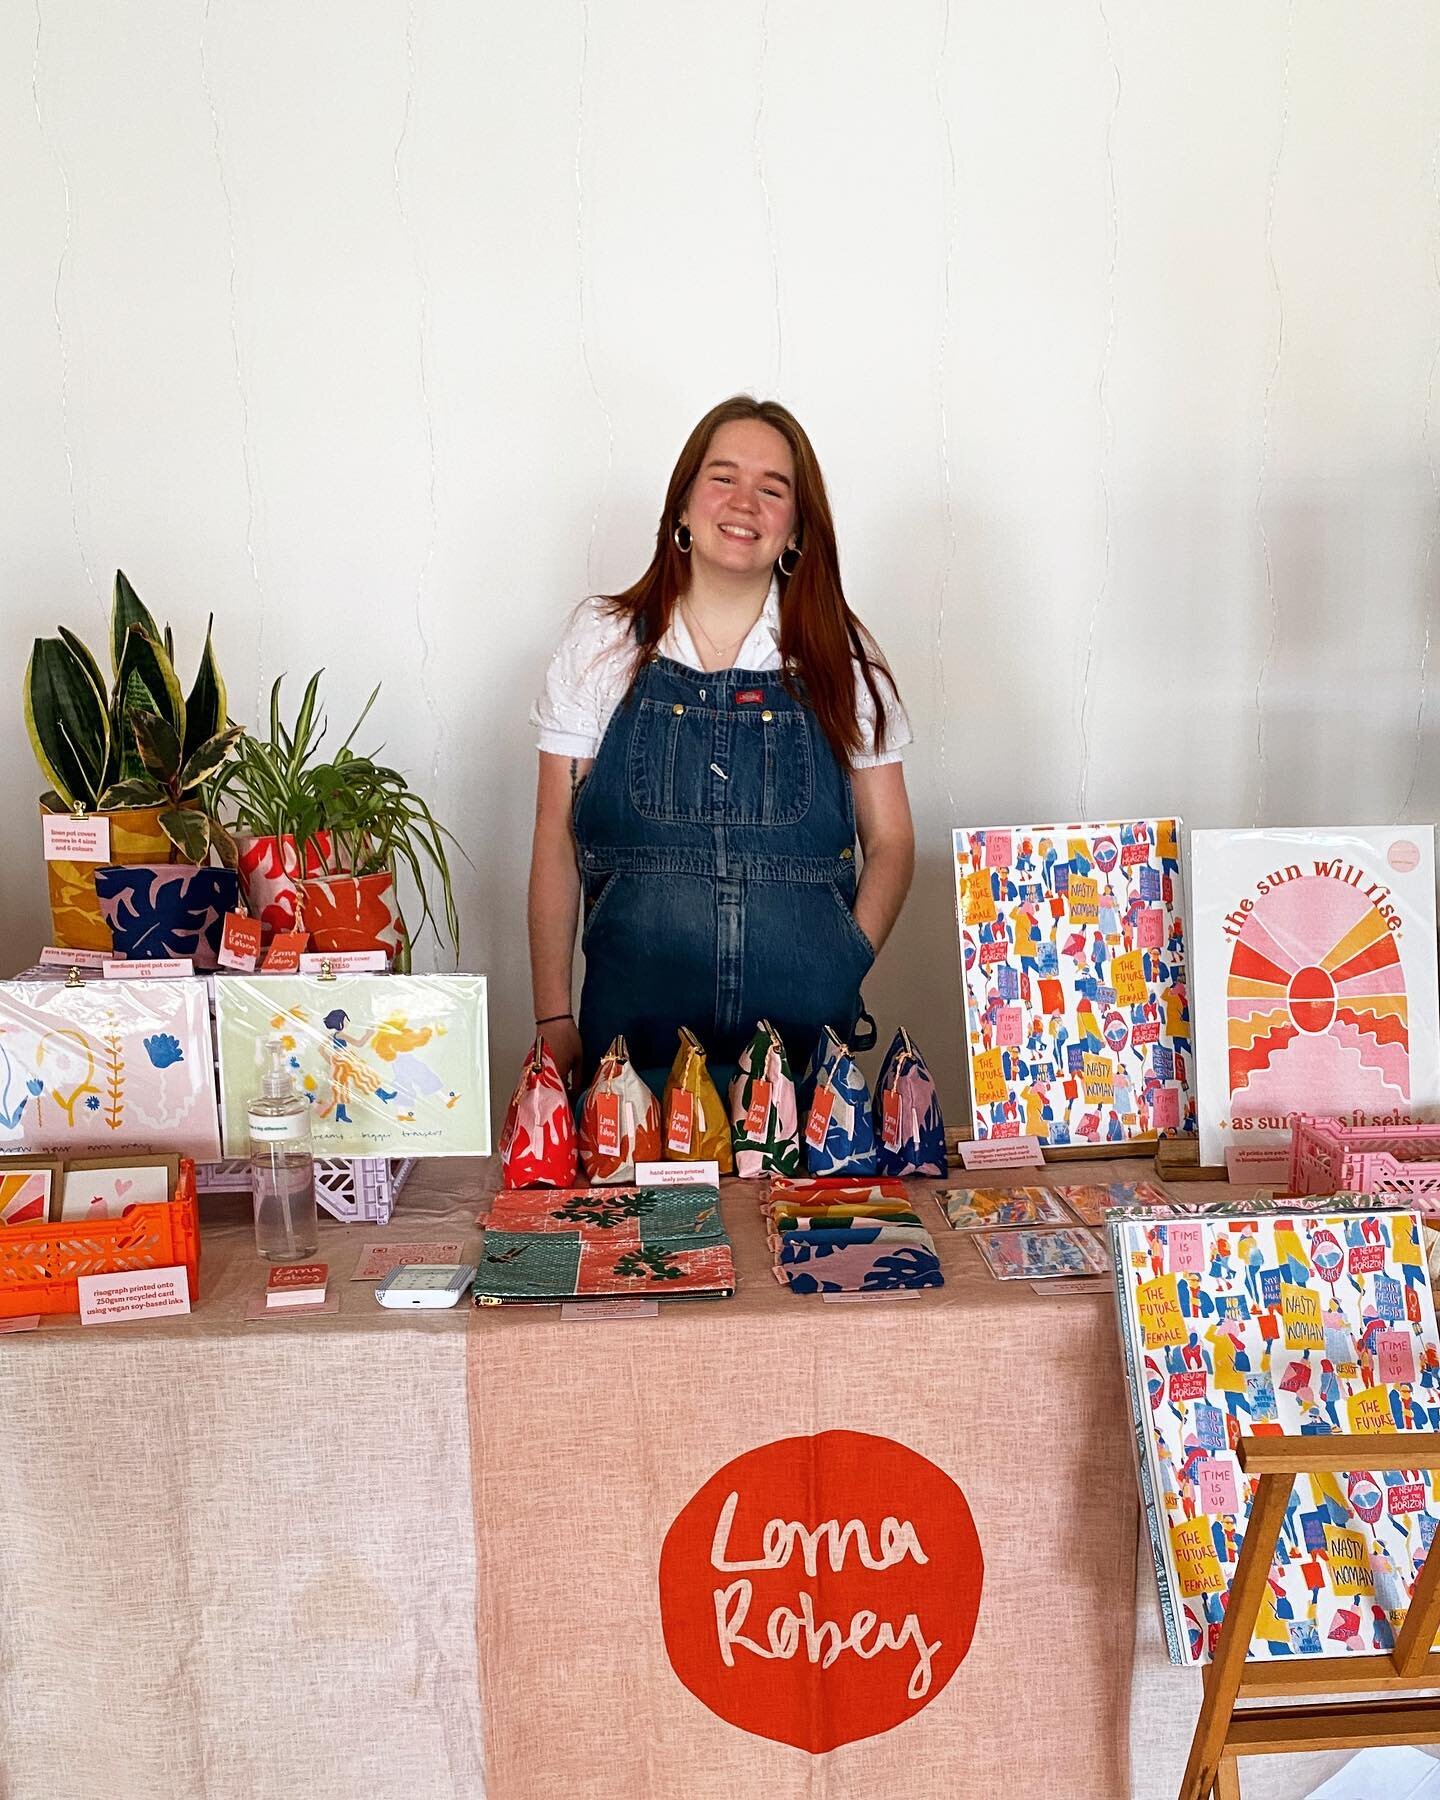 i&rsquo;m upstairs at @showroomworkstation with all my colourful printed bits and bobs! there&rsquo;s such an amazing line up of over 50 creatives here and the event has been beautifully curated by Char @endlesslovecreative - there is truly something